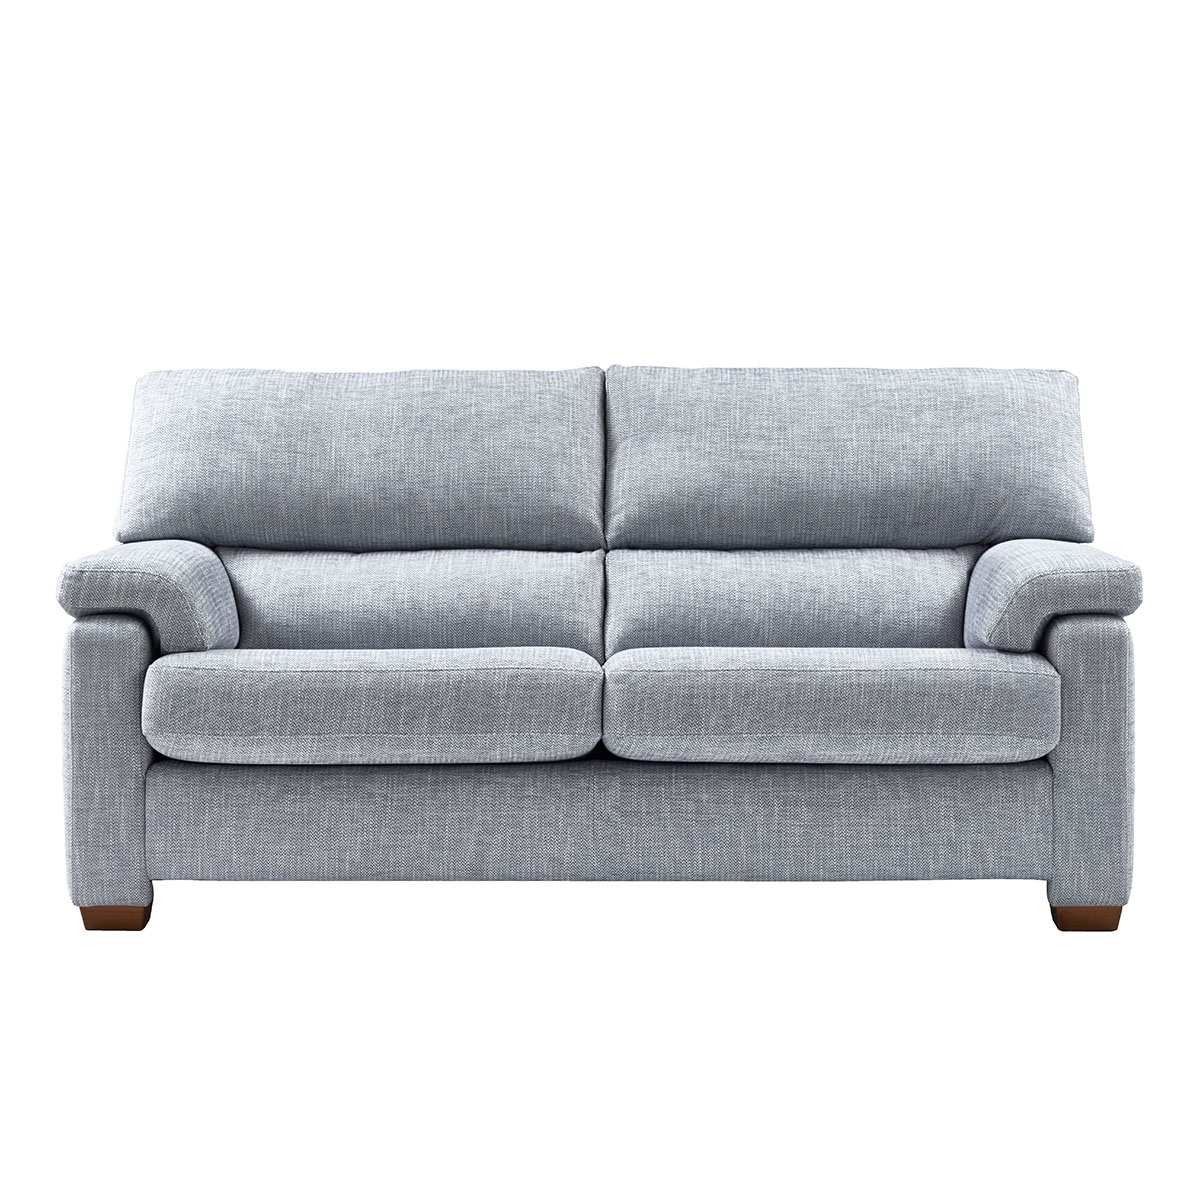 Harrow 3 Seater Sofa Collingwood, How Much Fabric Required For 3 Seater Sofa